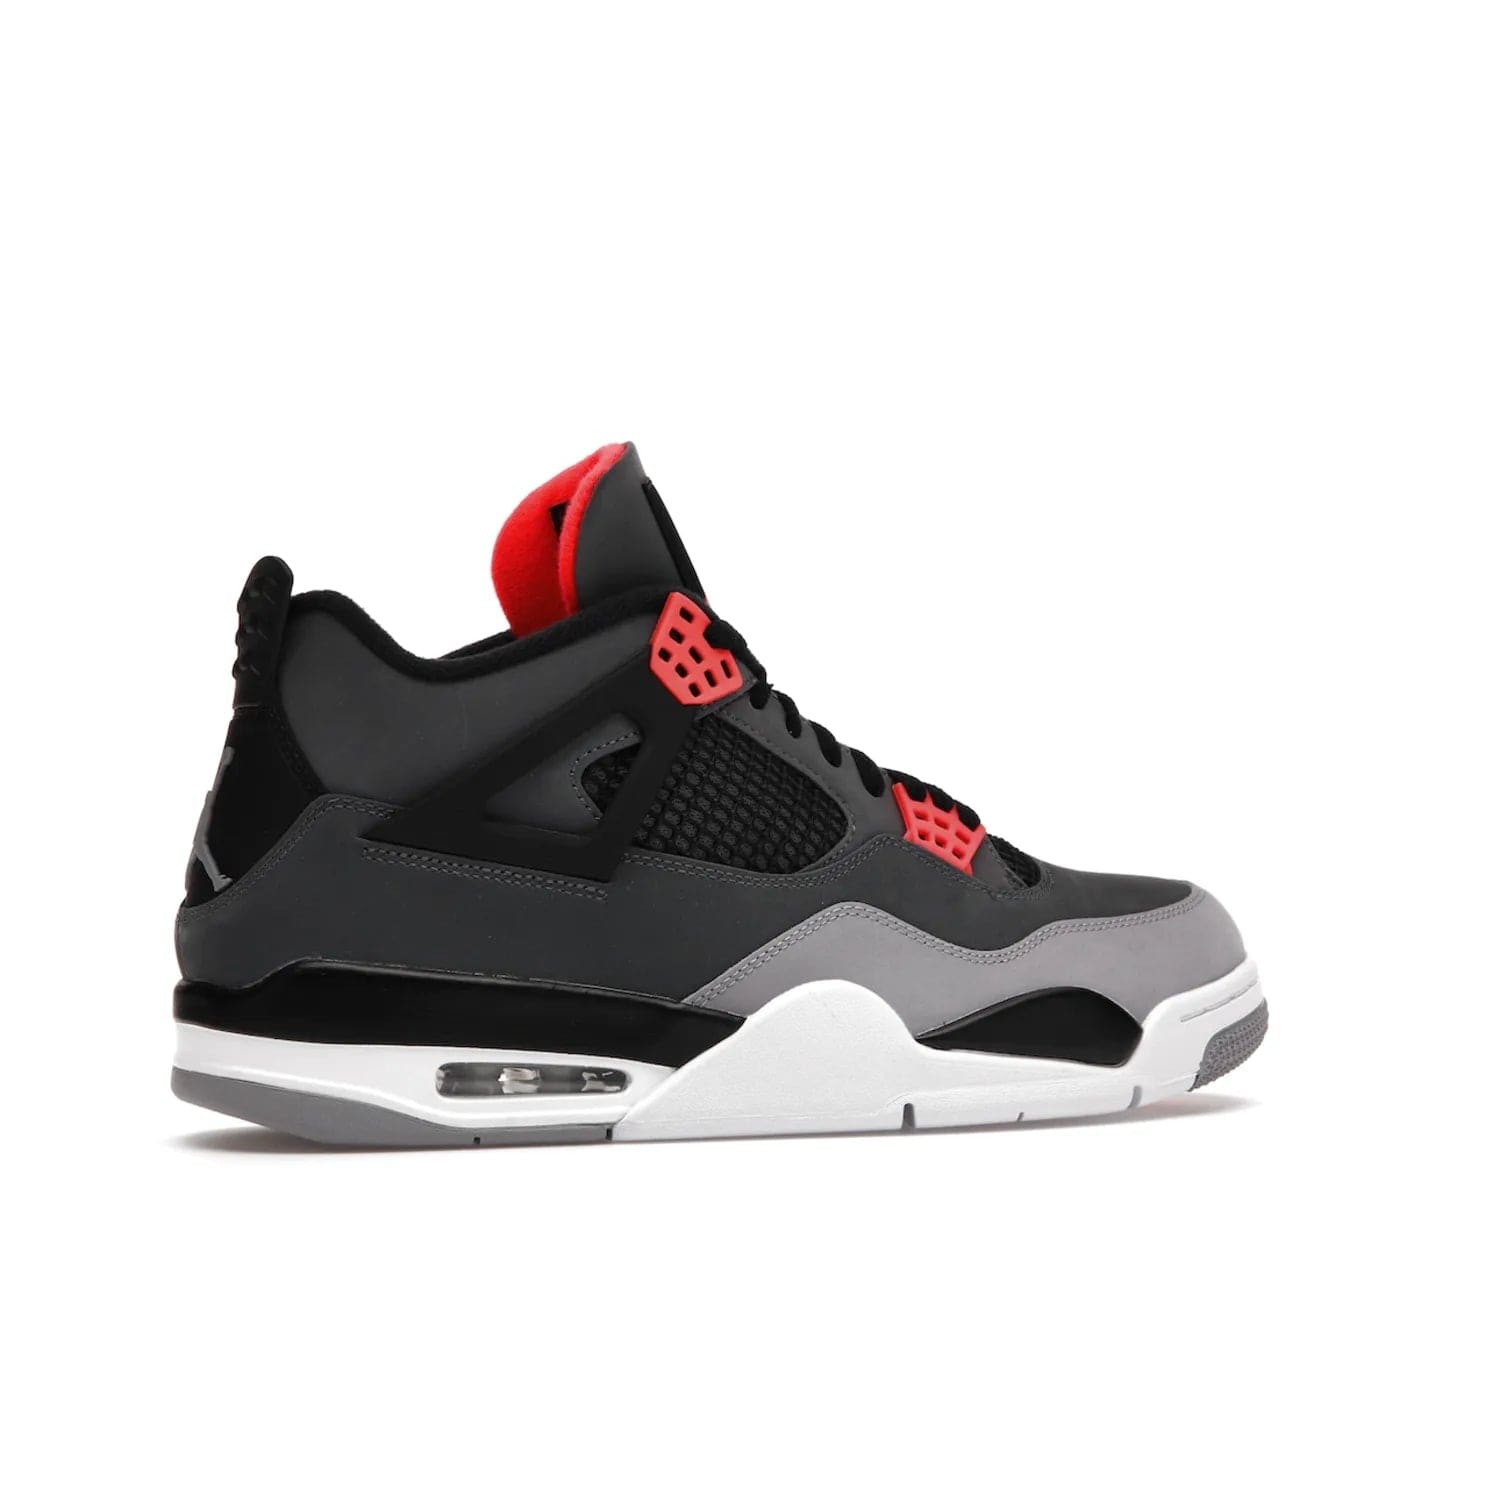 Jordan 4 Retro Infrared - Image 35 - Only at www.BallersClubKickz.com - Introducing the classic & timeless Air Jordan 4 Infrared. Durabuck upper, TPU mesh inserts, tech straps & heel tabs in dark grey and infrared accents. White sole with visible Air units. Out June 15, 2022. Get your pair now!